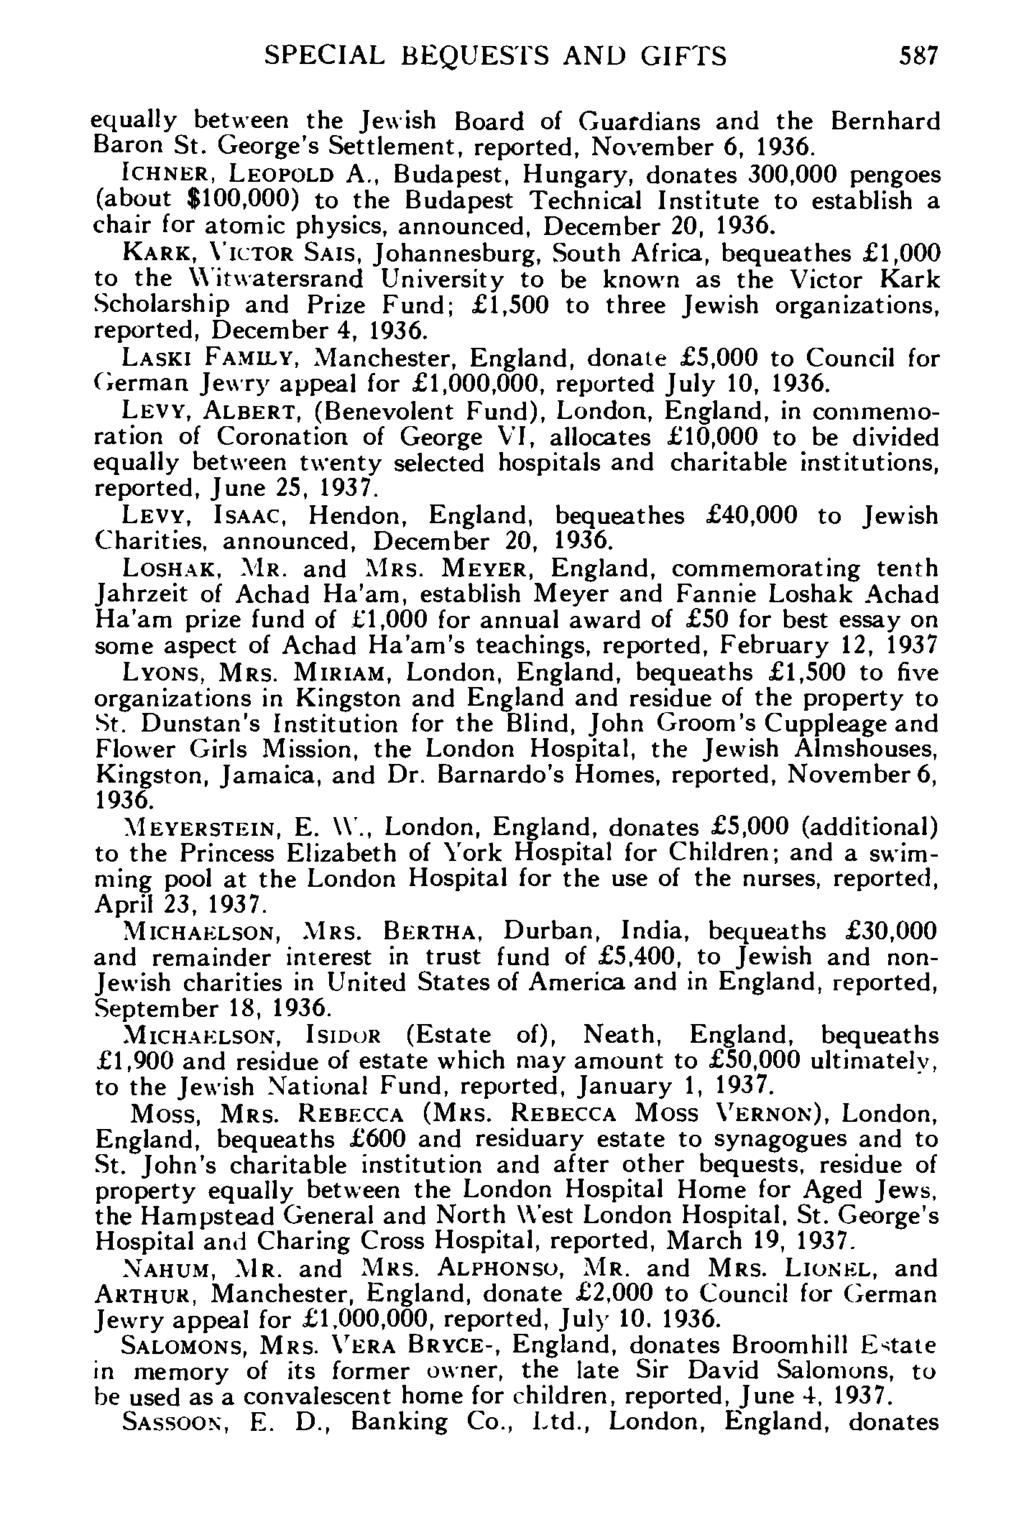 SPECIAL BEQUESTS AND GIFTS 587 equally between the Jewish Board of Guardians and the Bernhard Baron St. George's Settlement, reported, November 6, 1936. ICHNER, LEOPOLD A.